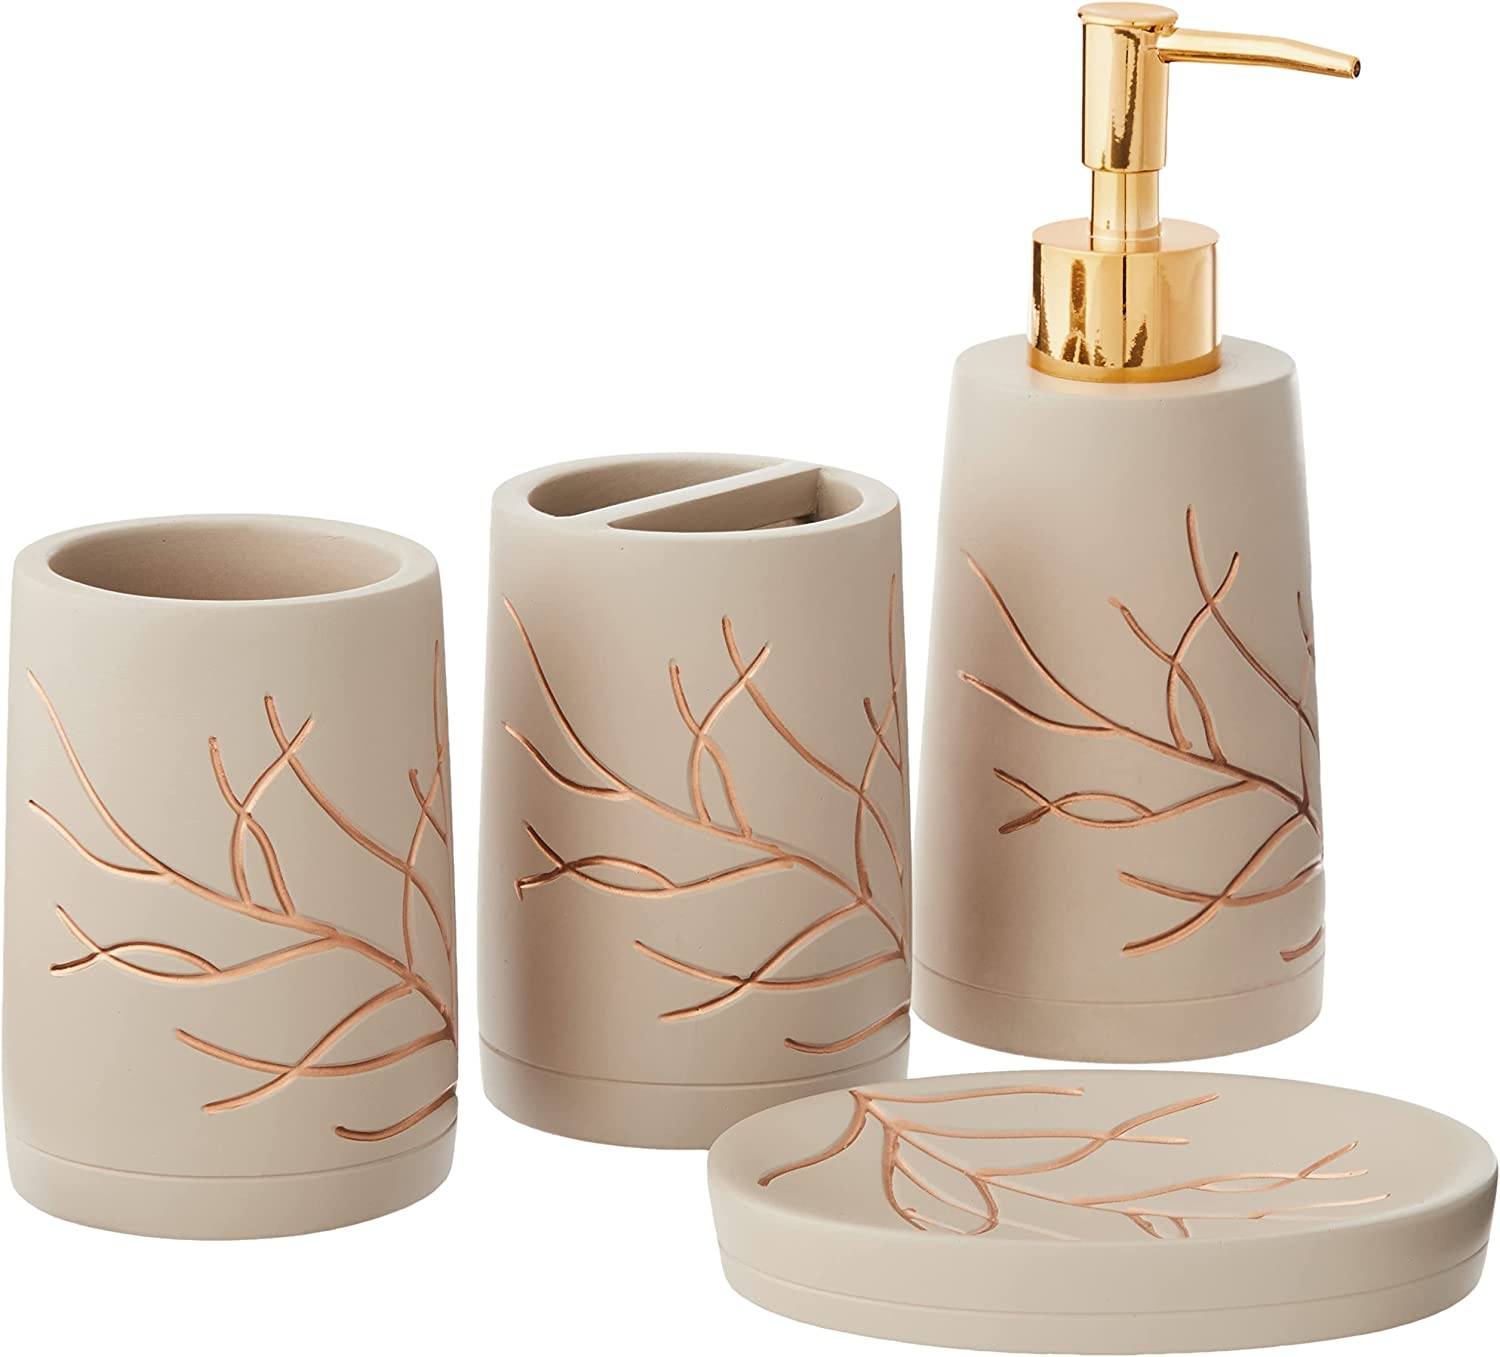 Sweet Home Collection - Urbana Bath Accessory Collection, 4 Piece Set